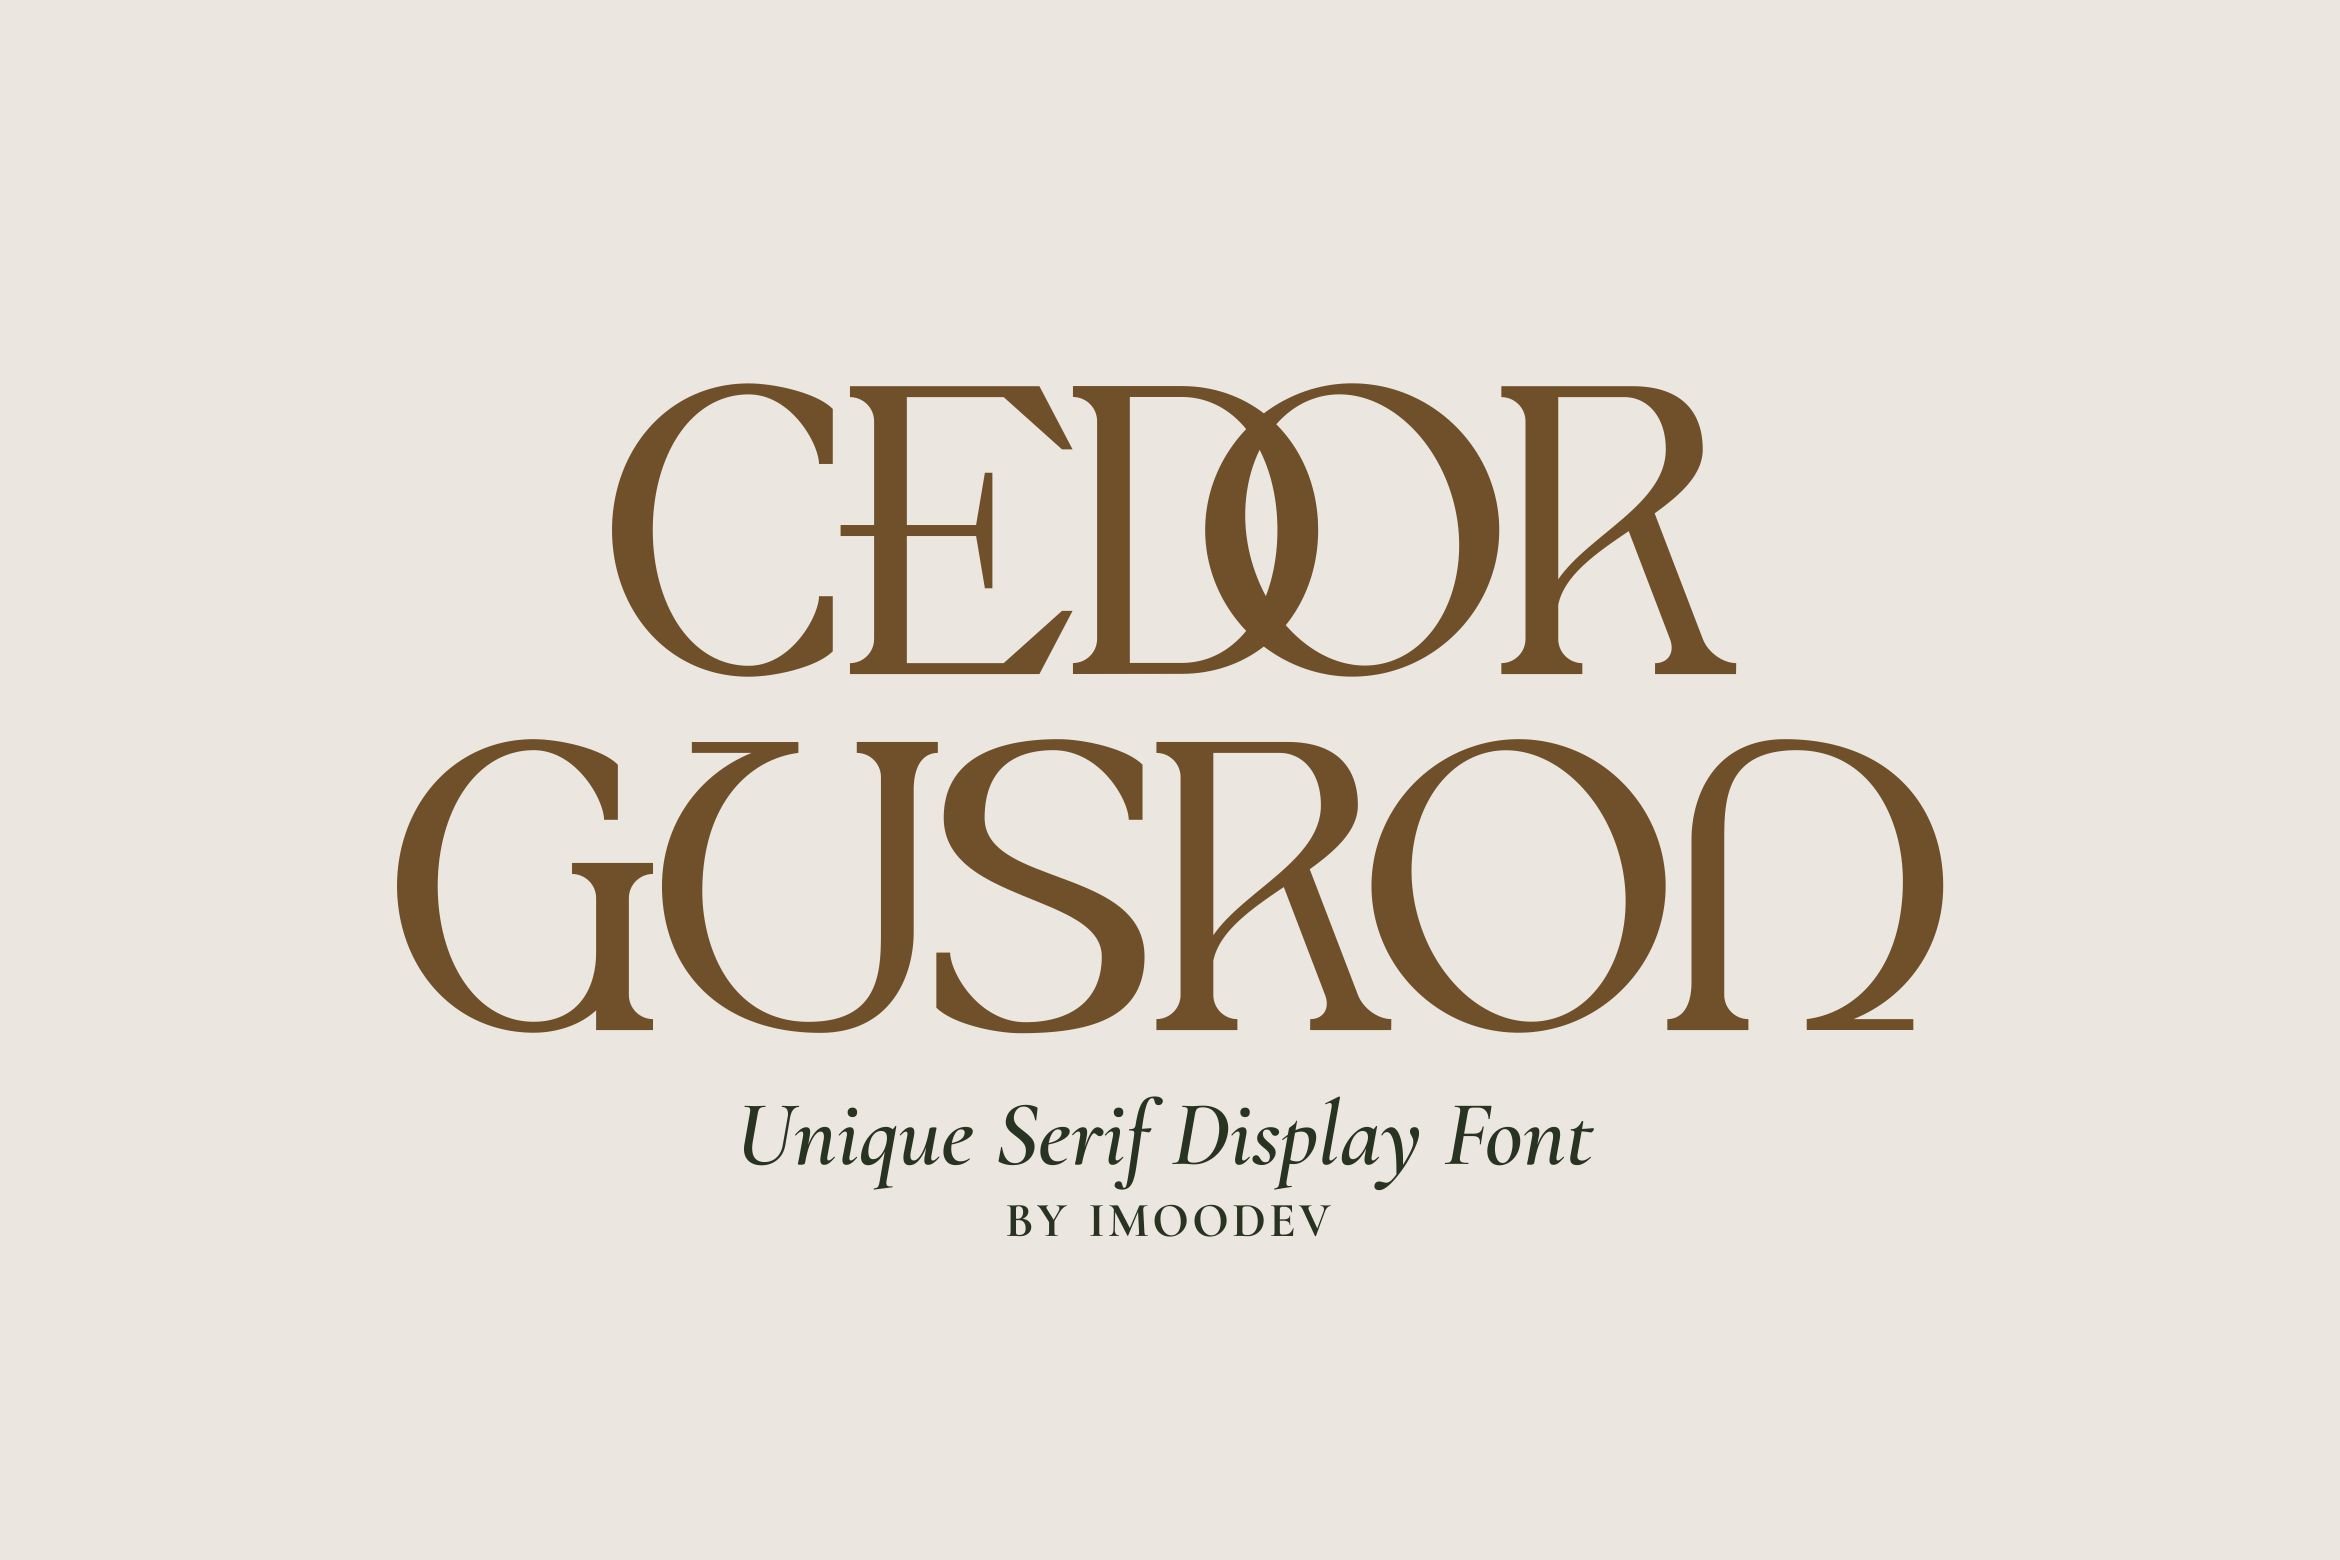 Cedor Gusron - Luxury Font cover image.